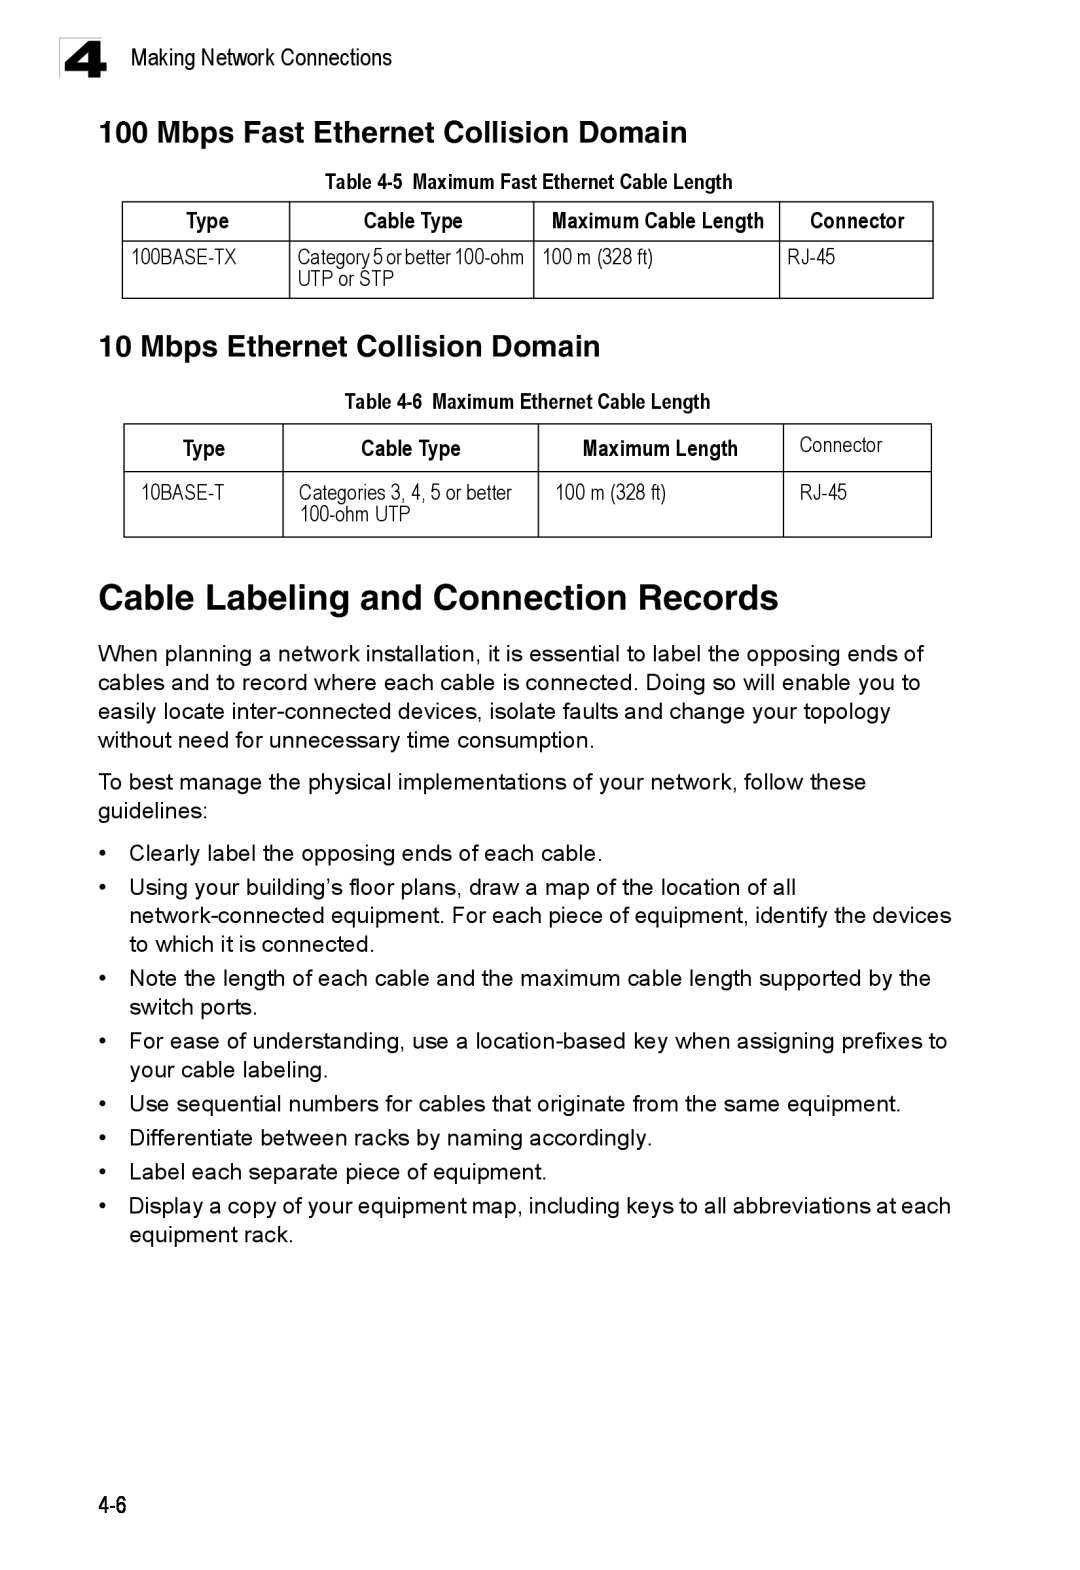 Accton Technology ES4524M-POE Cable Labeling and Connection Records, Mbps Fast Ethernet Collision Domain, Cable Type 